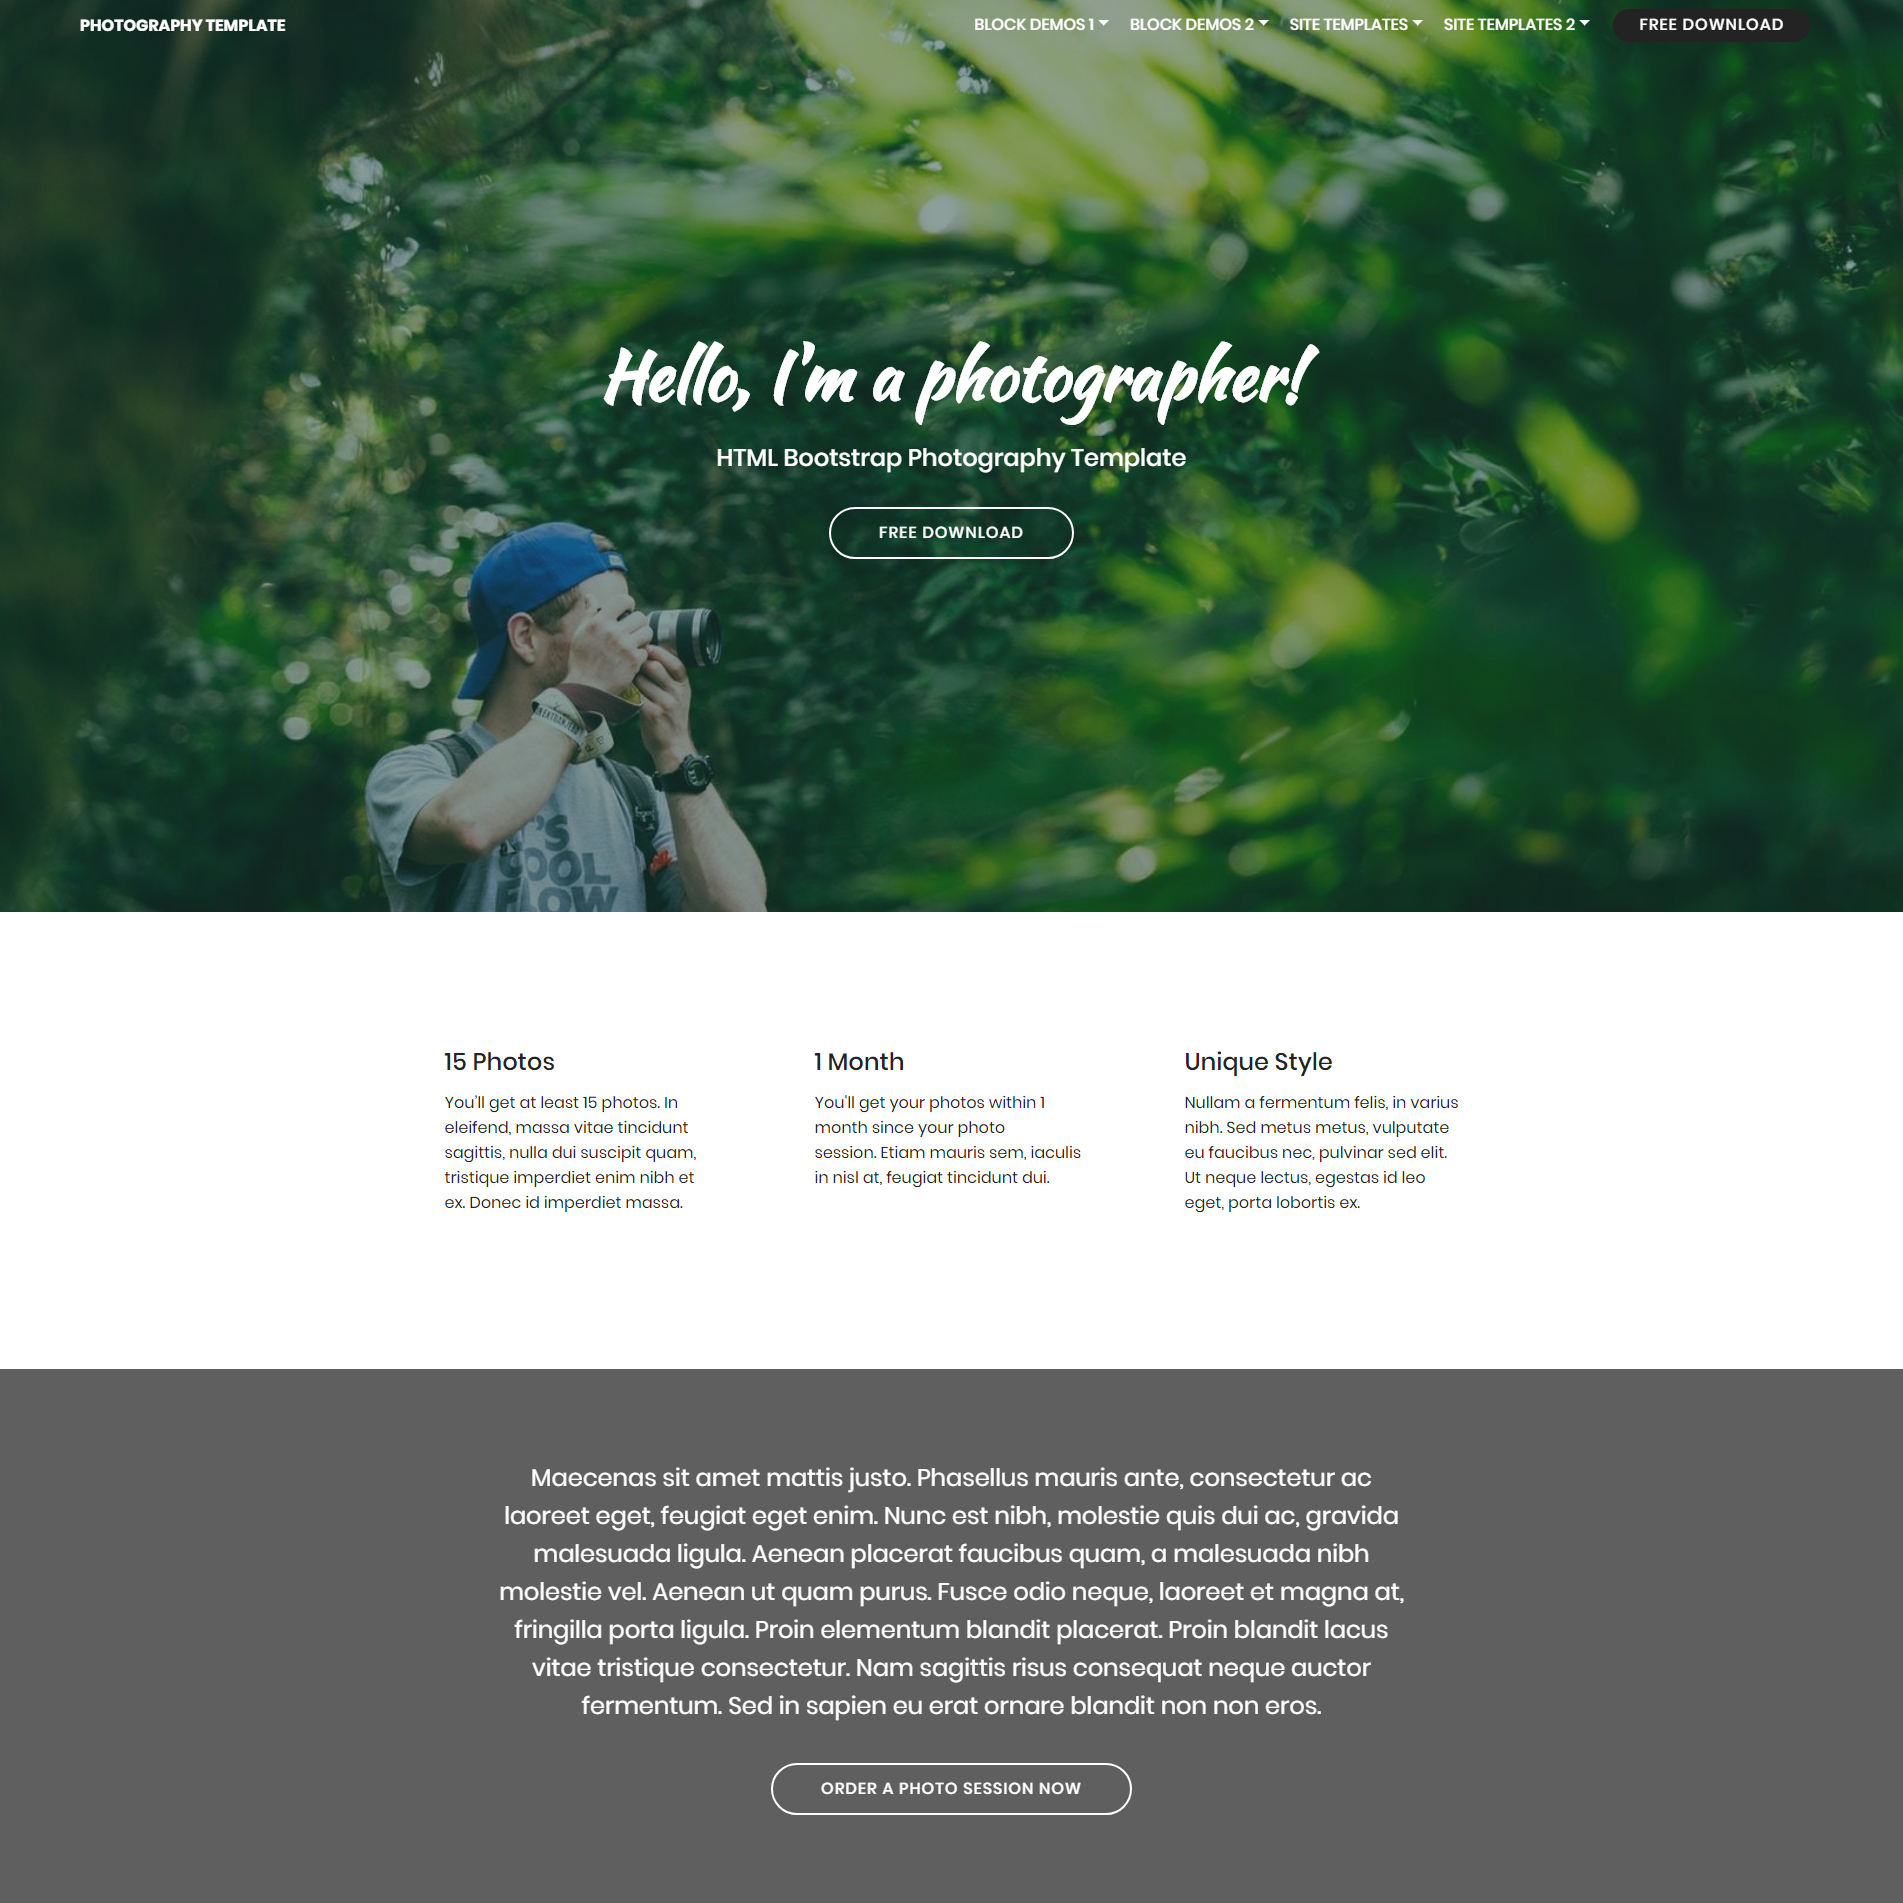 HTML Bootstrap Photography Templates